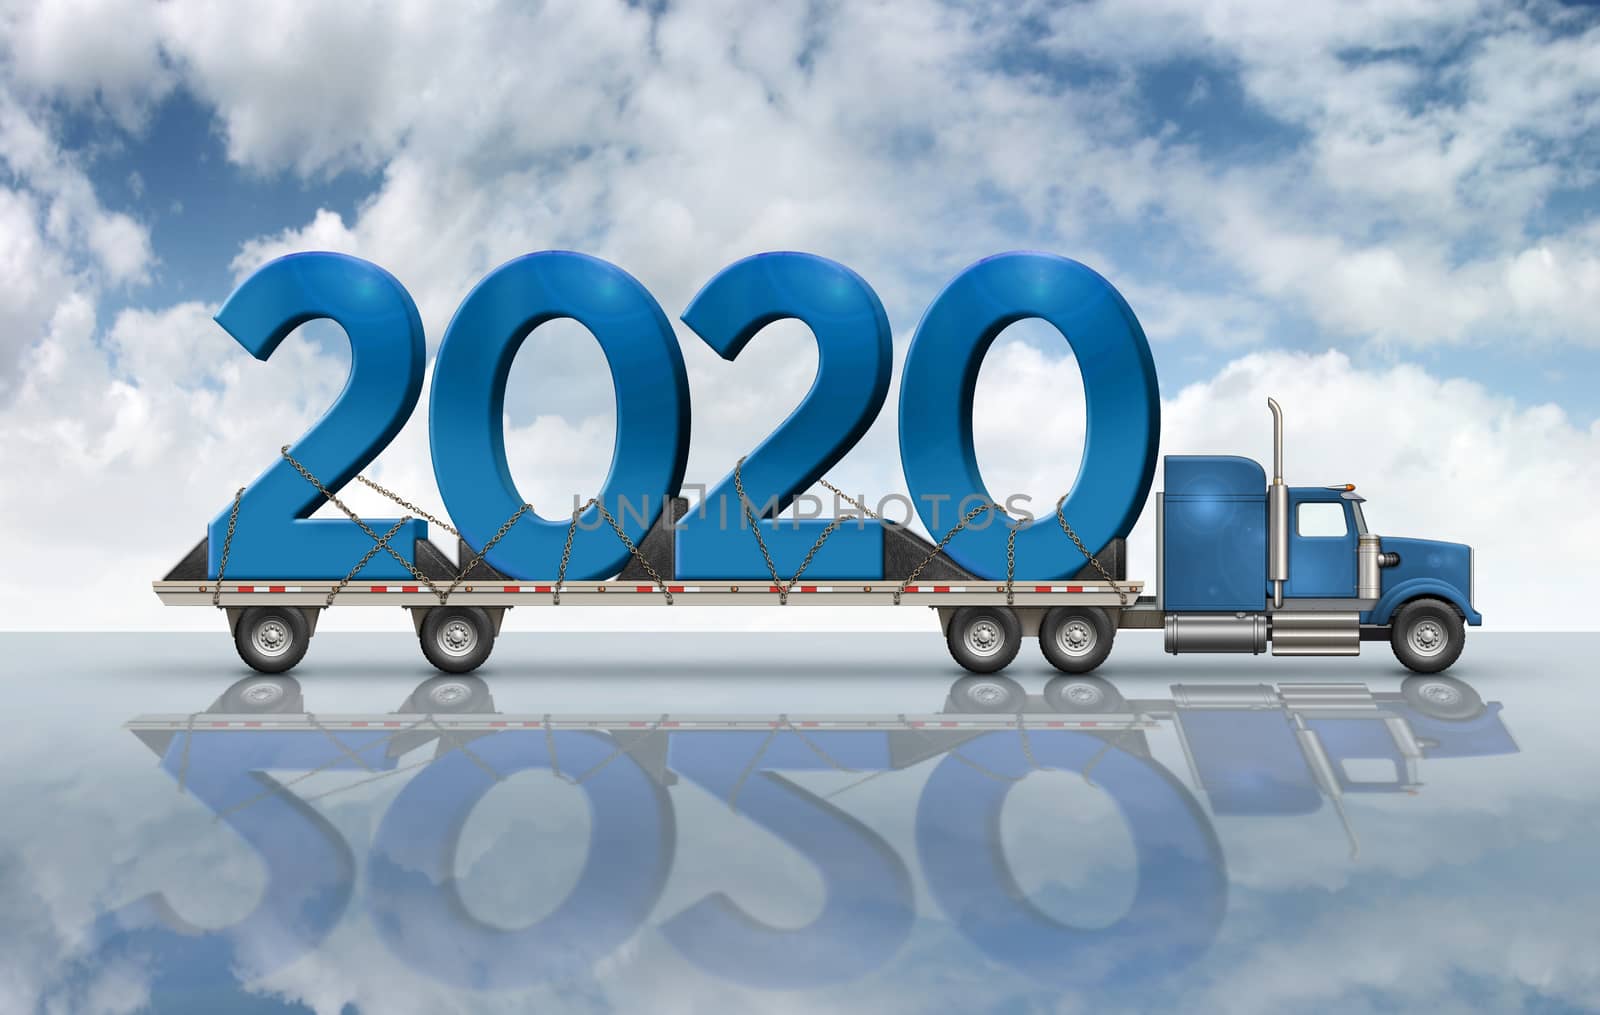 3D illustration of the year 2020 on a flatbed truck set on a reflective surface with a sky background.